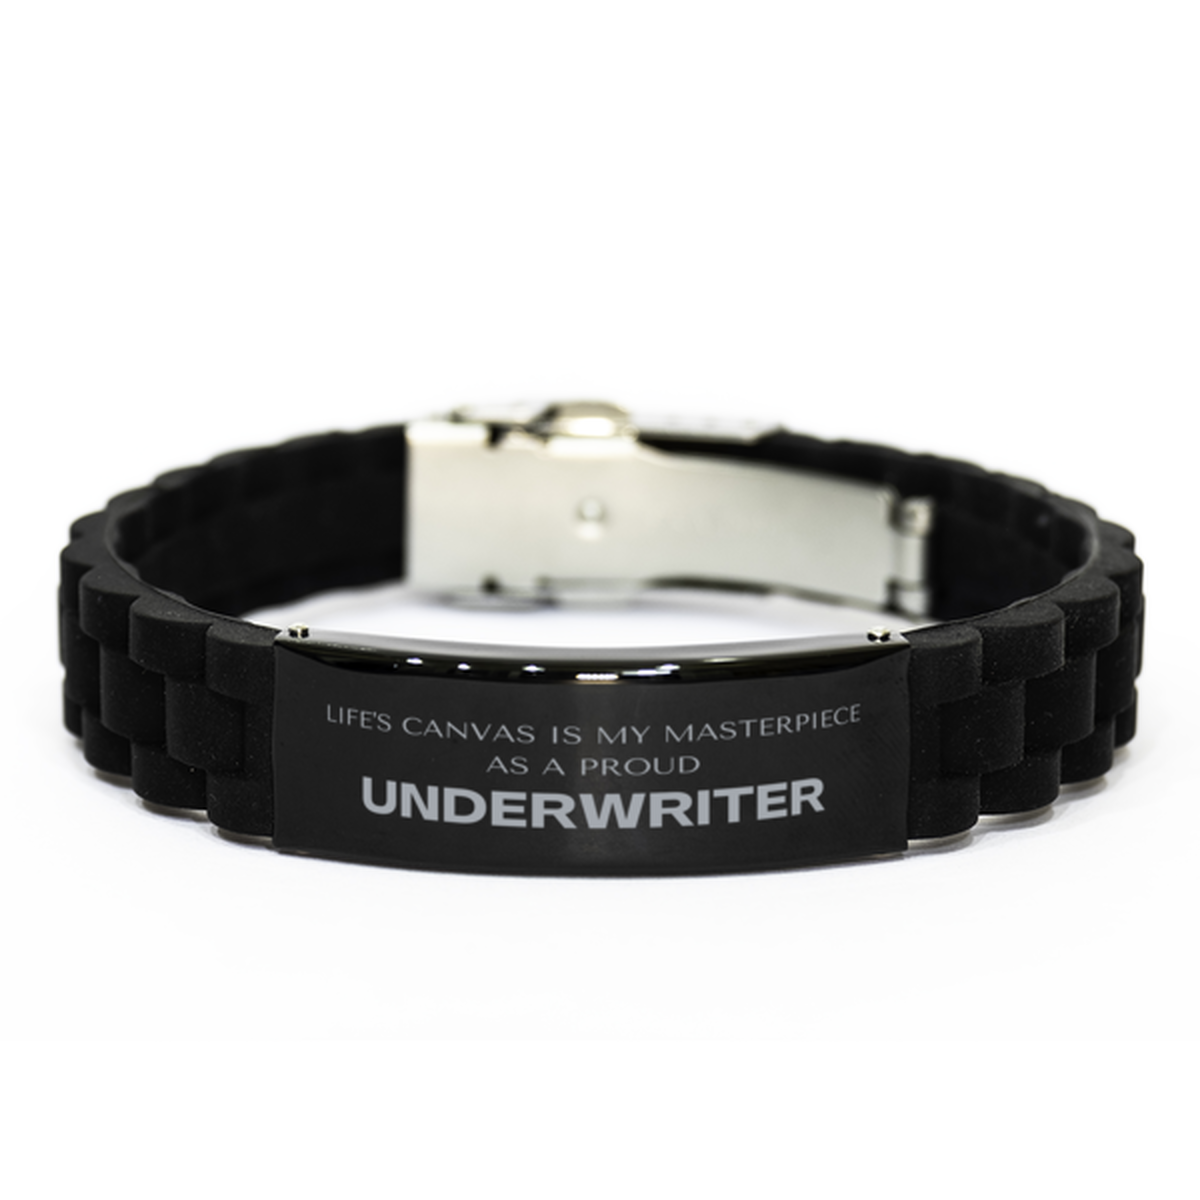 Proud Underwriter Gifts, Life's canvas is my masterpiece, Epic Birthday Christmas Unique Black Glidelock Clasp Bracelet For Underwriter, Coworkers, Men, Women, Friends